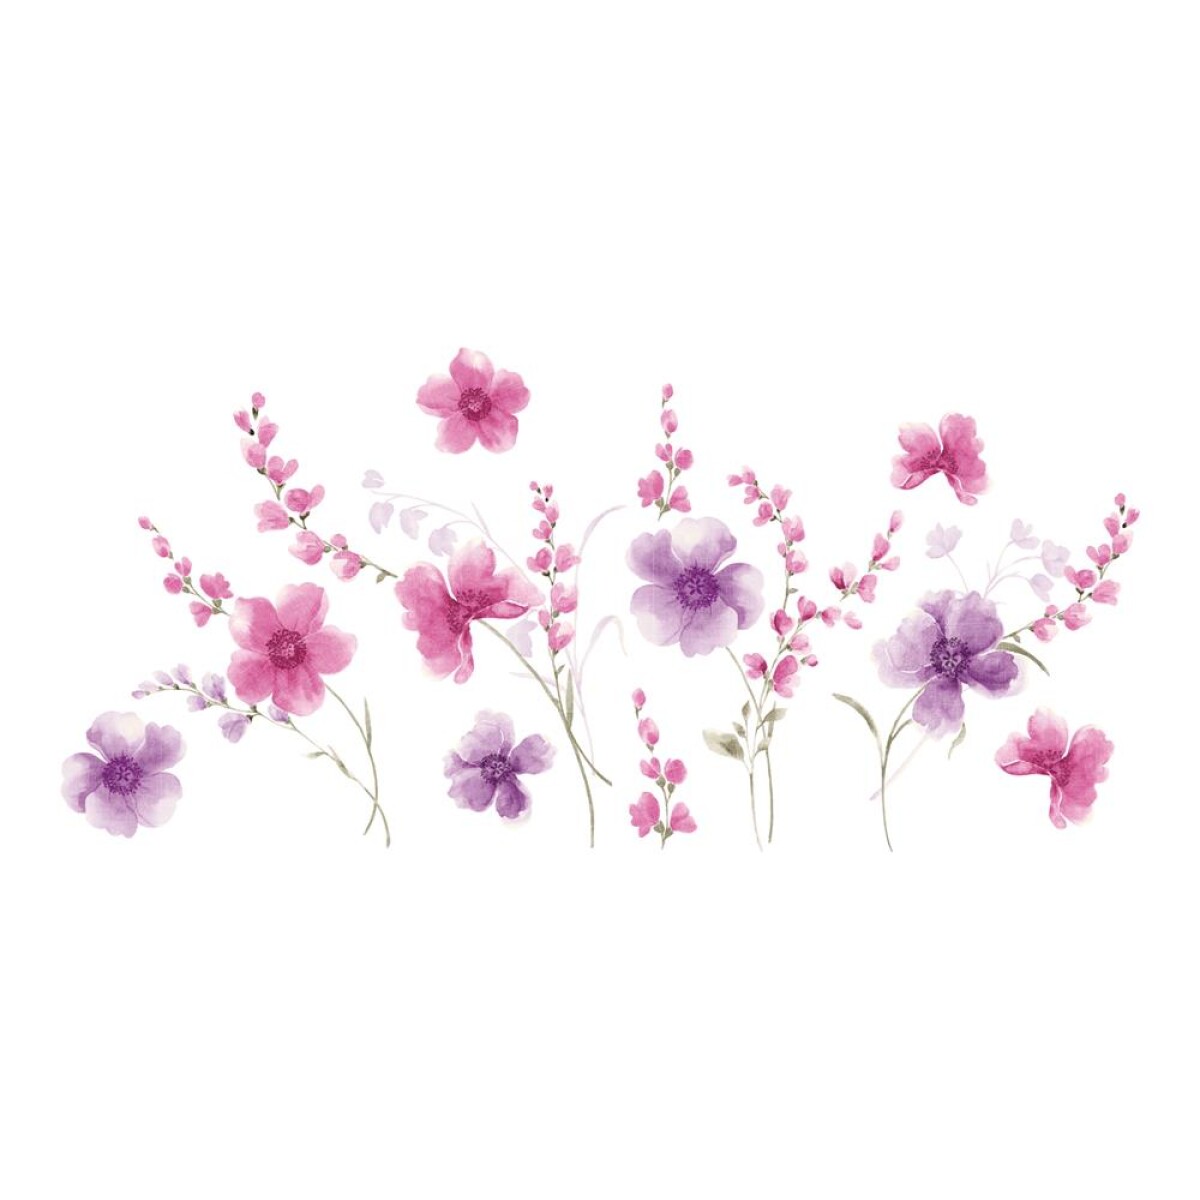 WALLPOPS SPRING FLOWERS WALL DECALS 